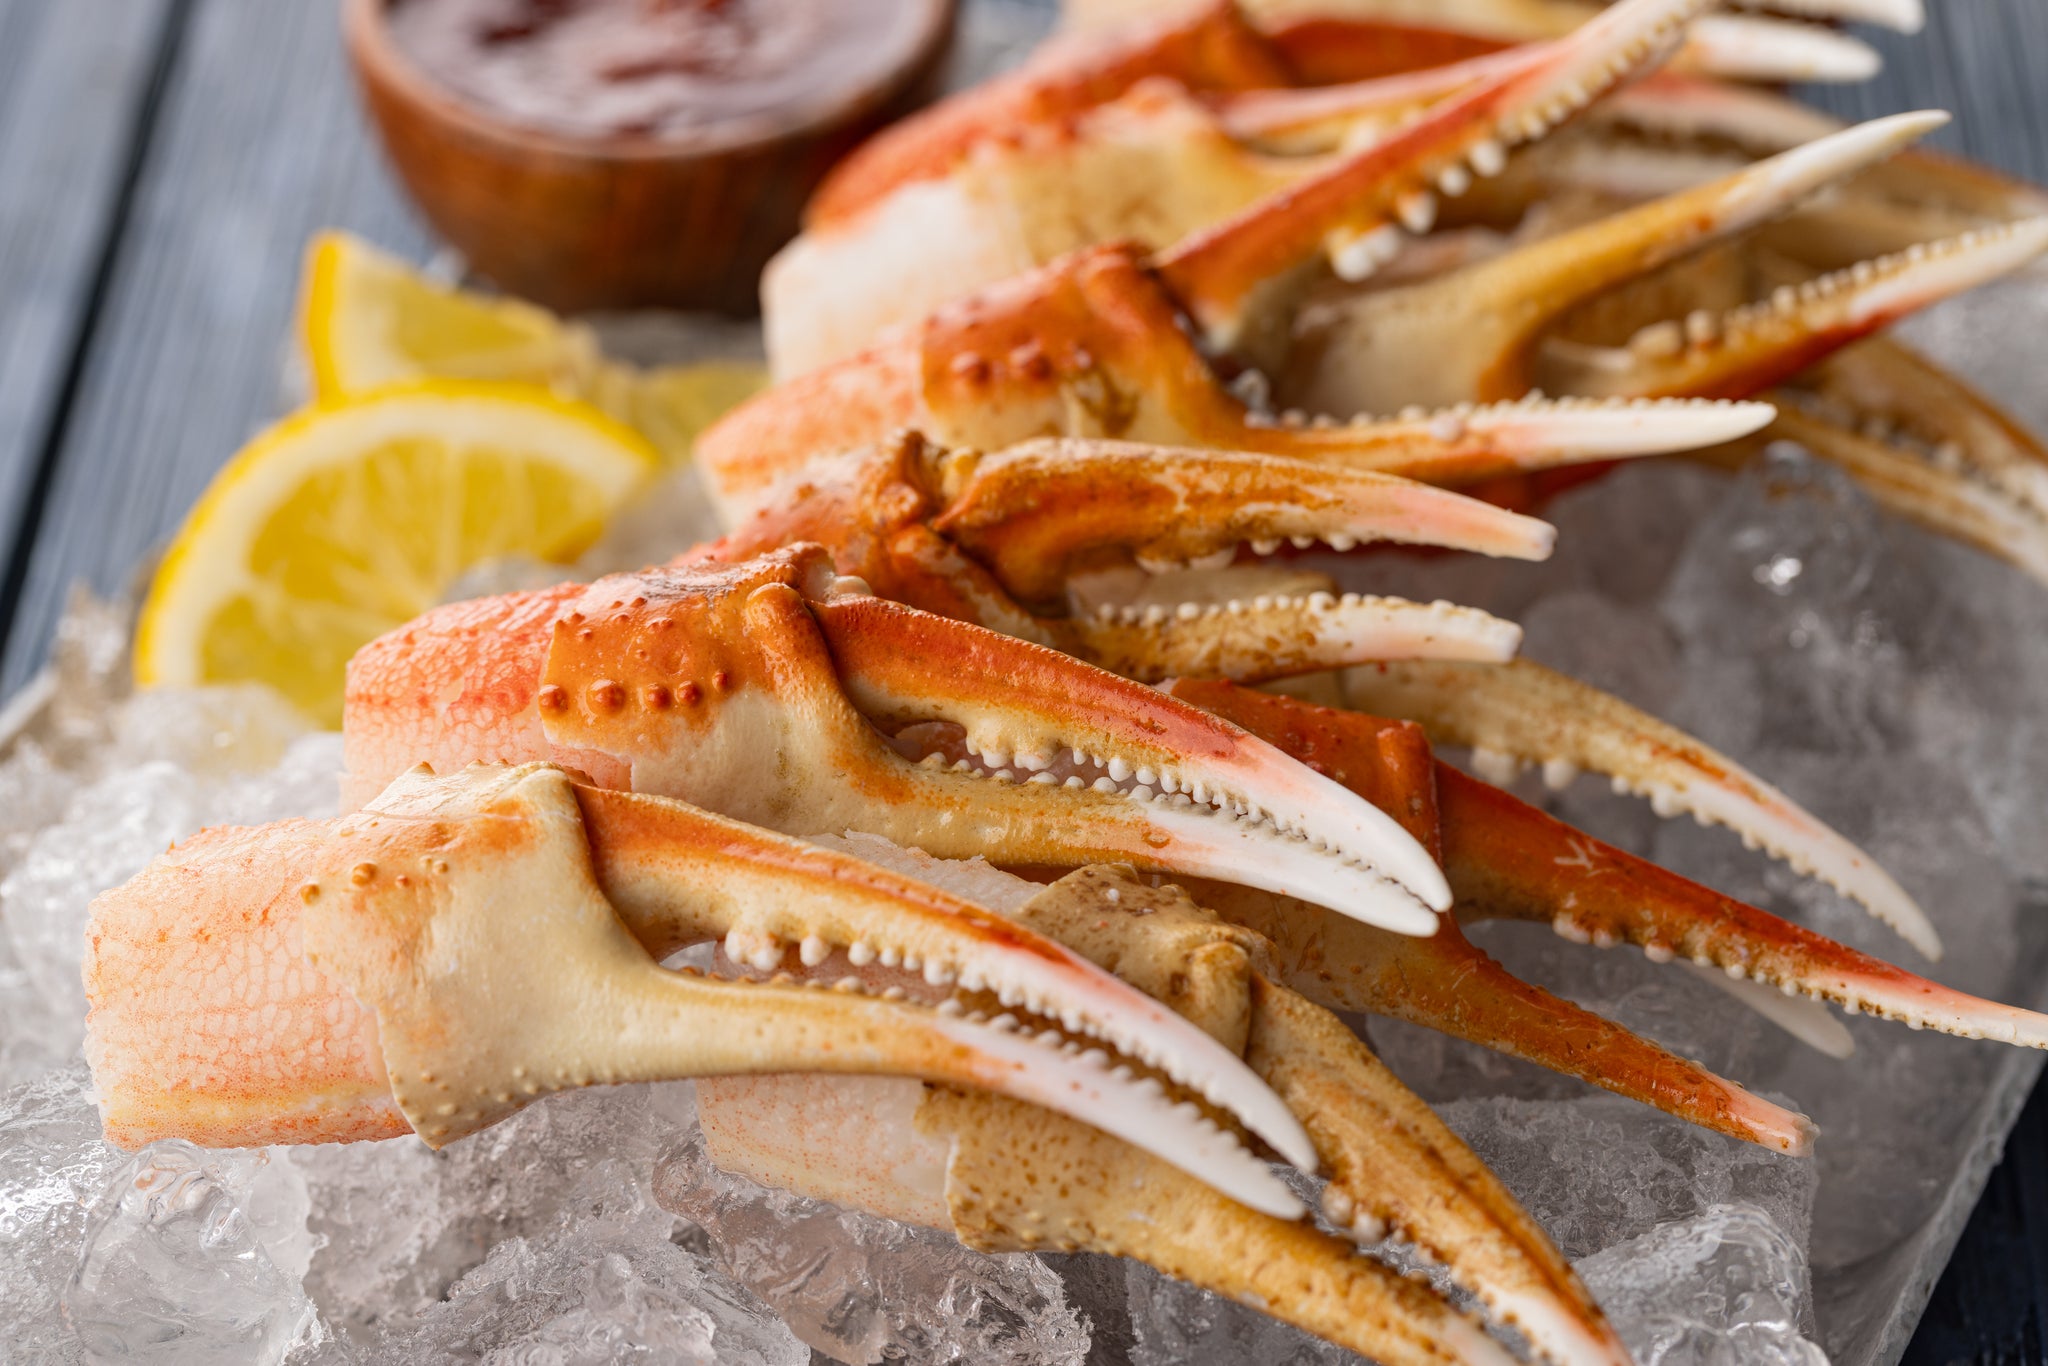 Snow crab claws on ice